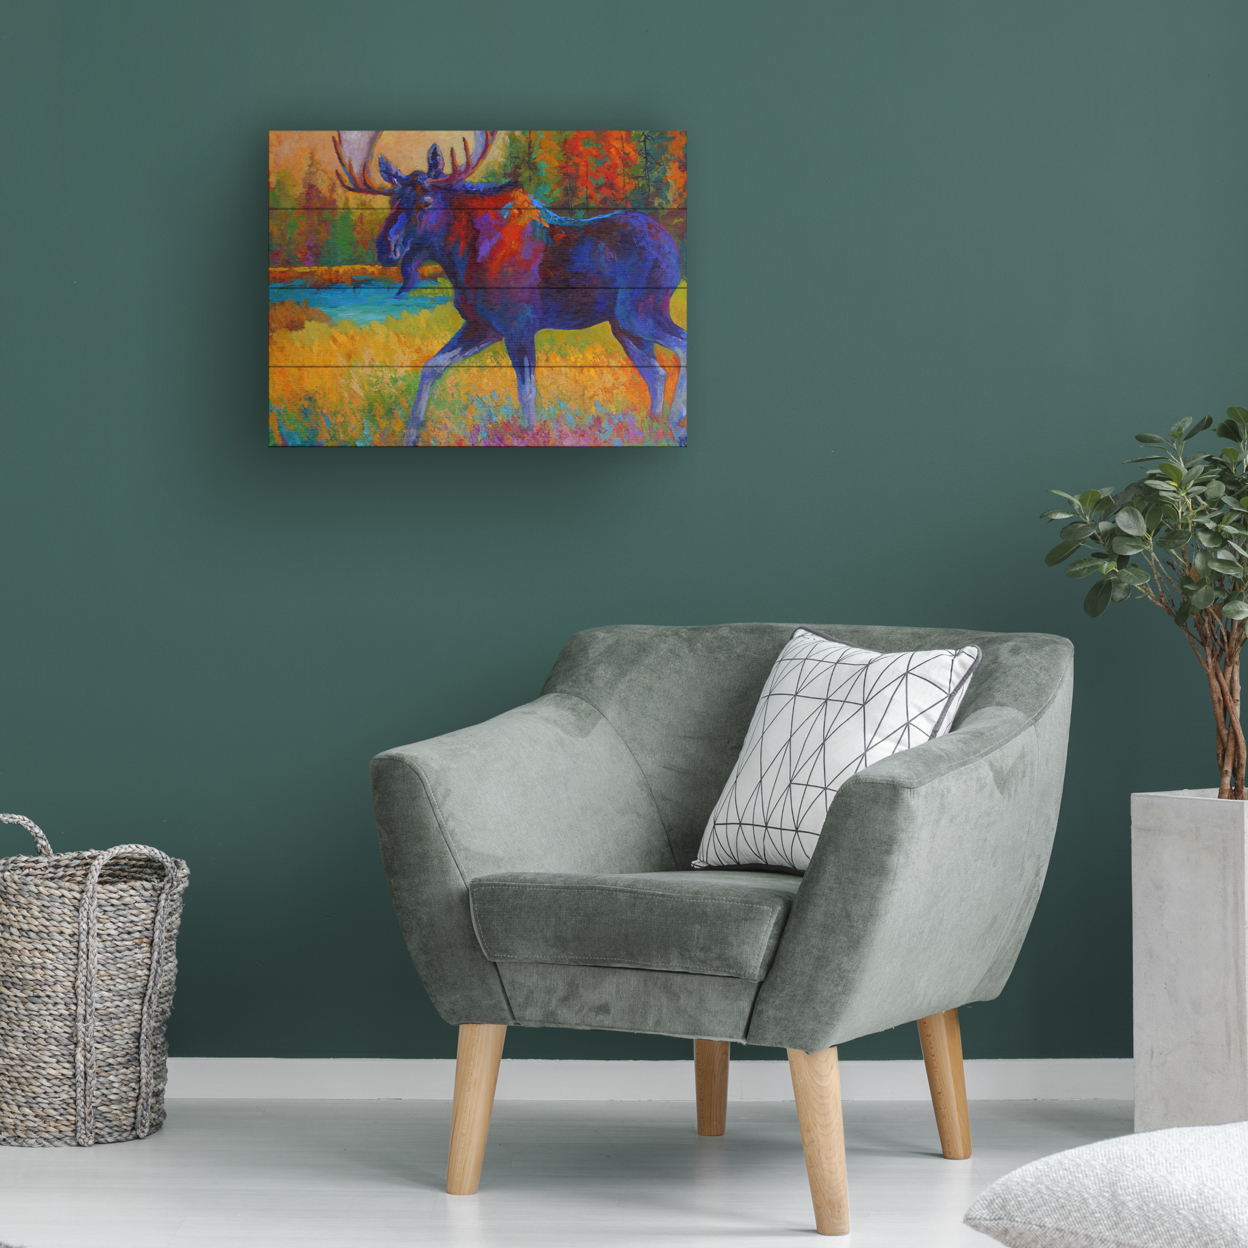 Wall Art 12 X 16 Inches Titled Majestic Moose Ready To Hang Printed On Wooden Planks